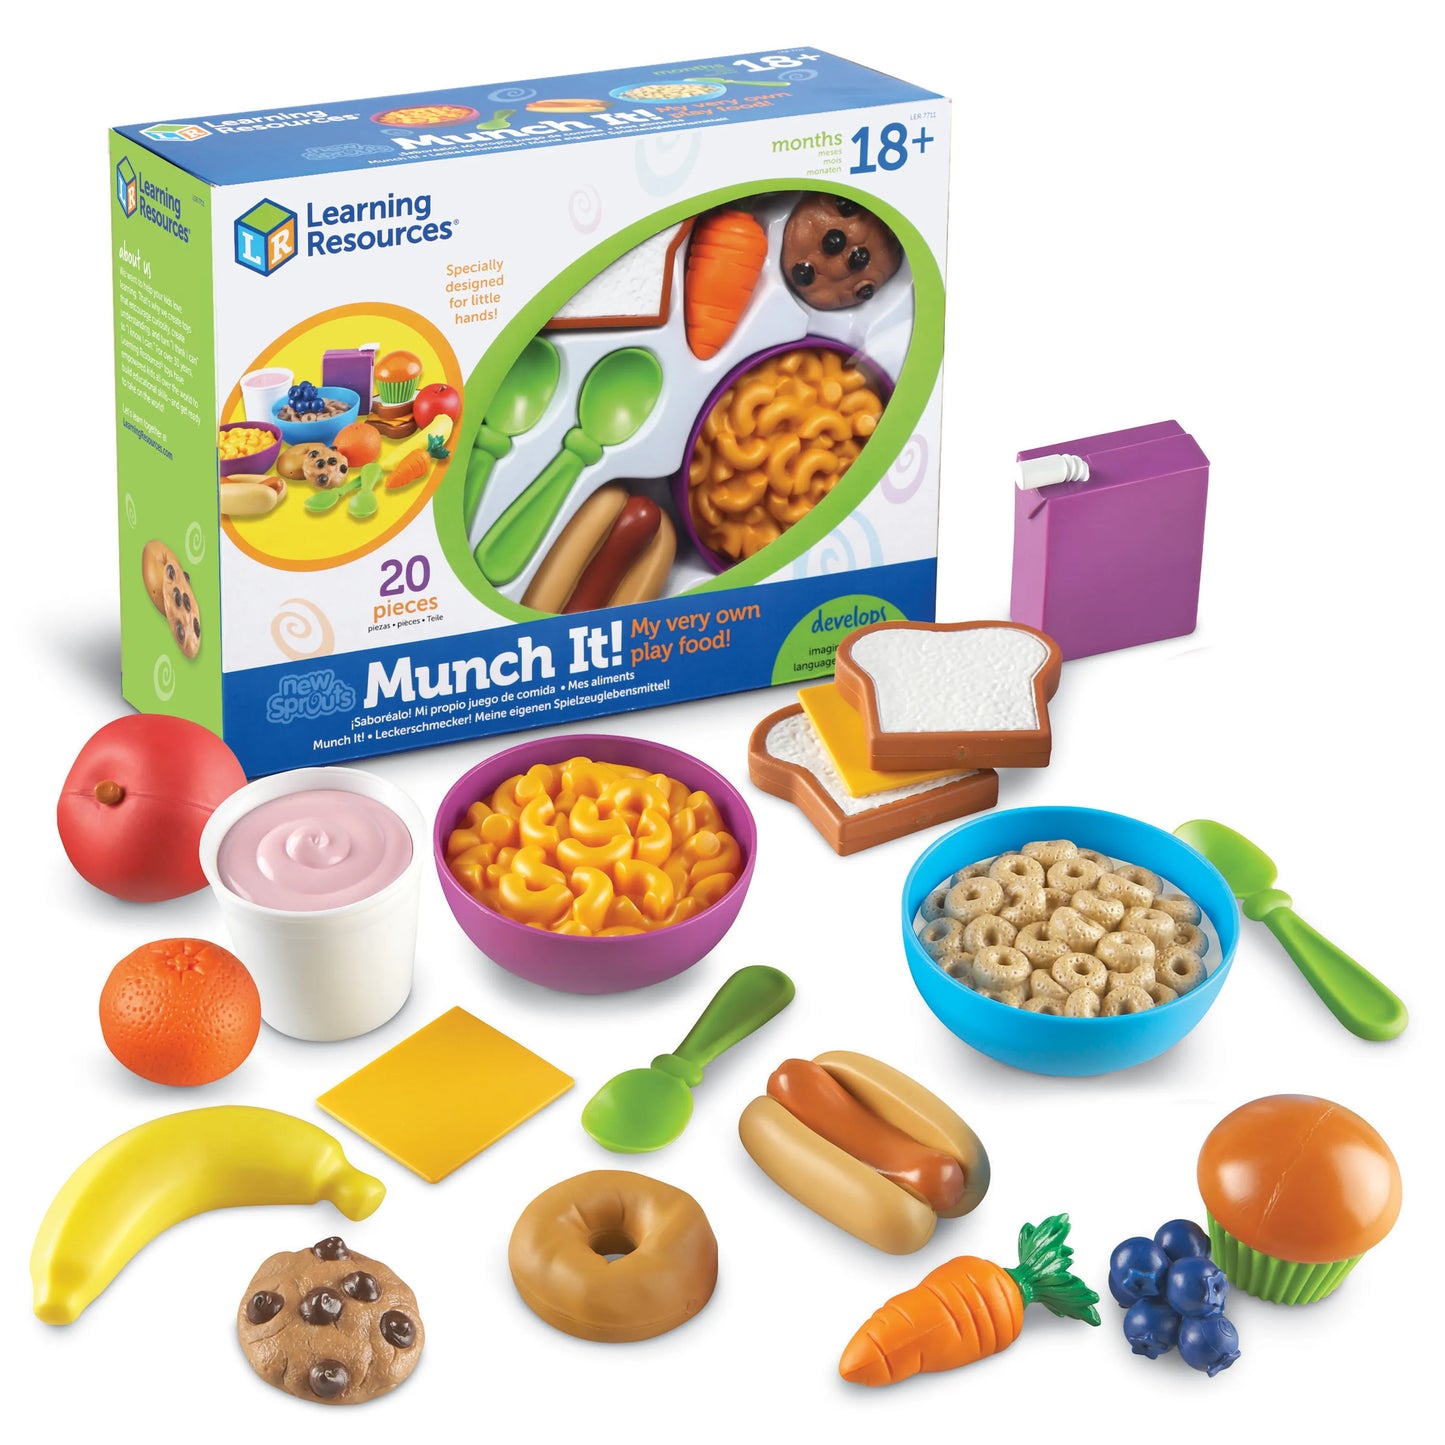 Learning Resources New Sprouts Munch It!